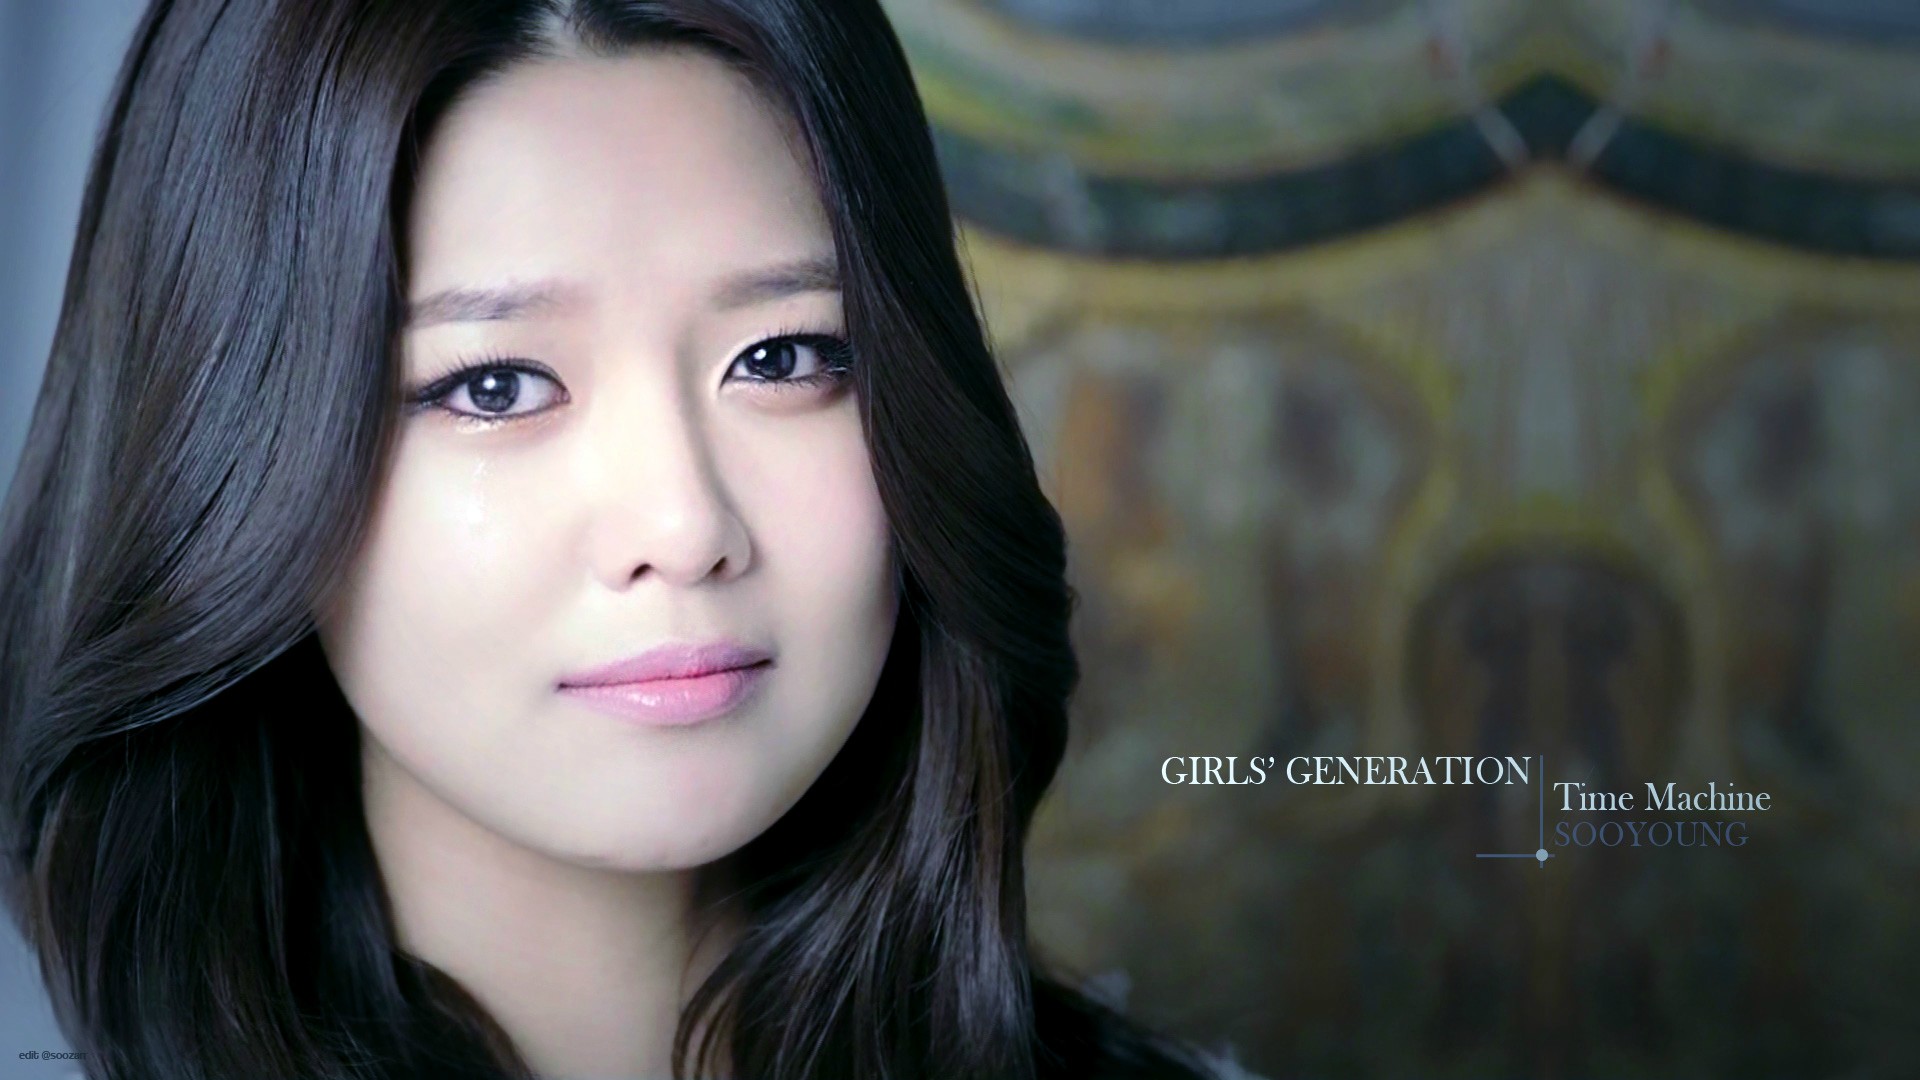 Girls Generation Snsd Sooyoung Time Machine Wallpaper